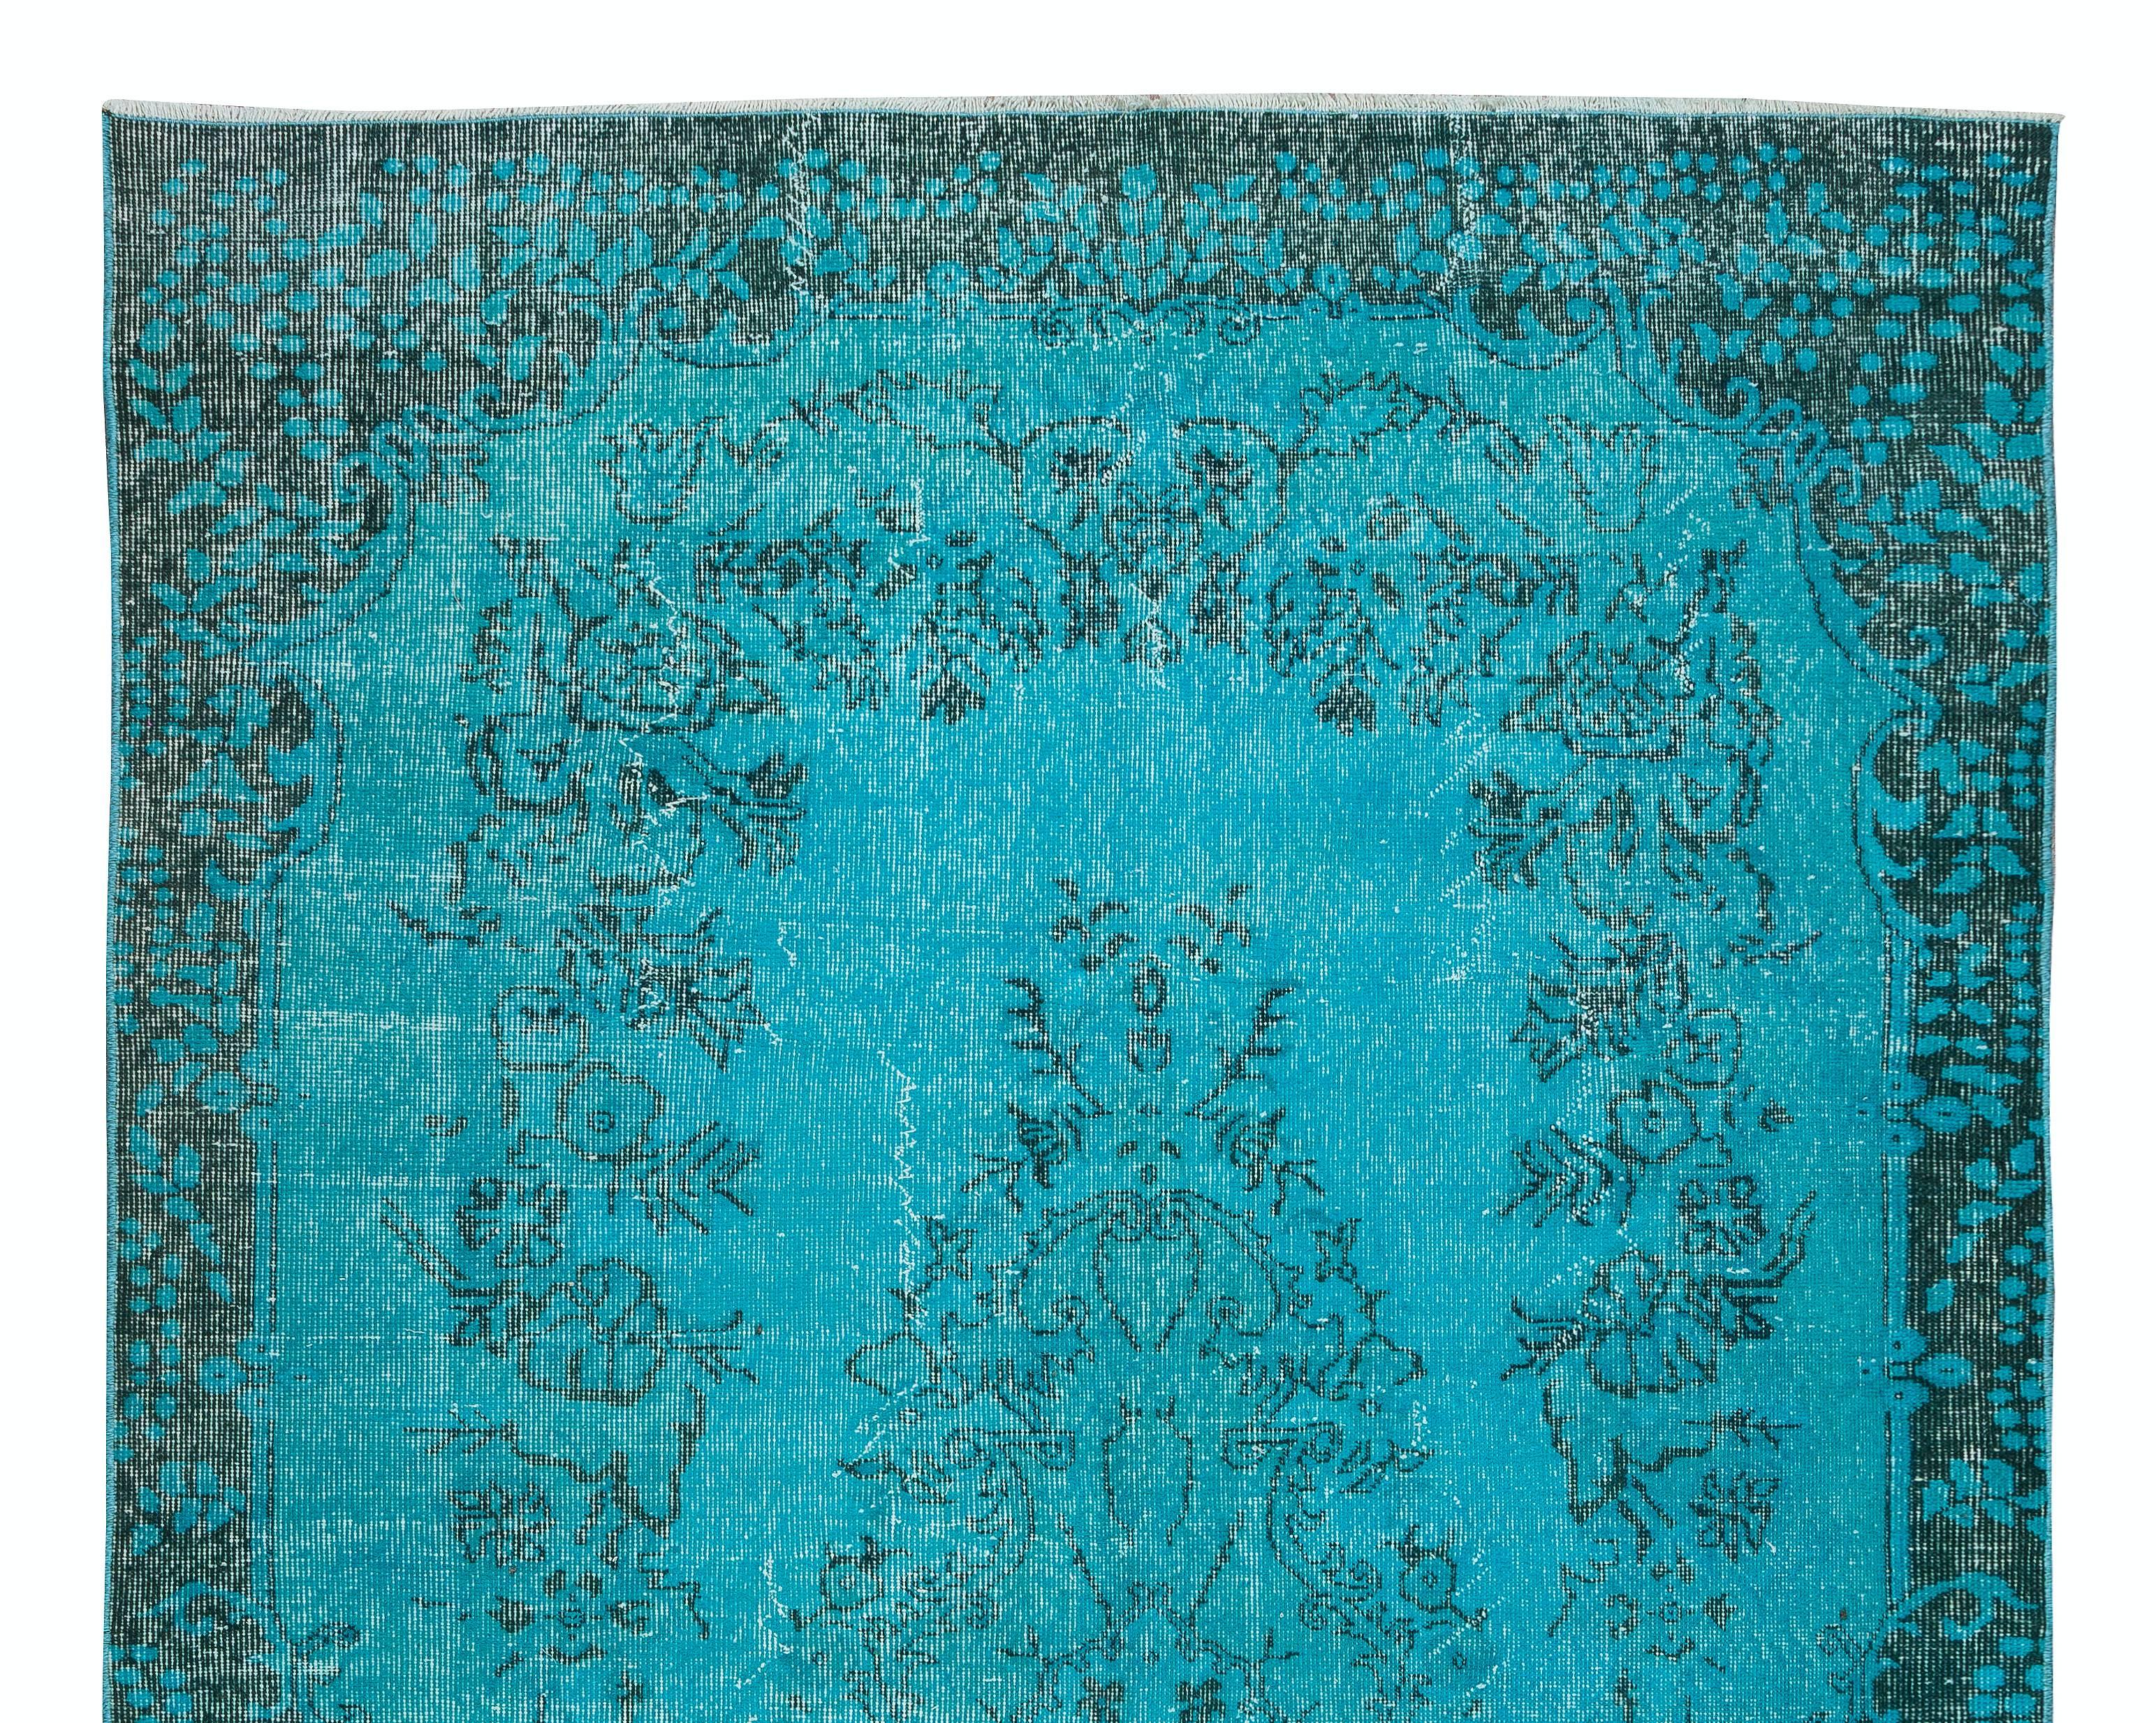 Hand-Woven 6x9.8 Ft Vintage Handmade Turkish Rug Over-Dyed in Teal Blue 4 Modern Interiors For Sale